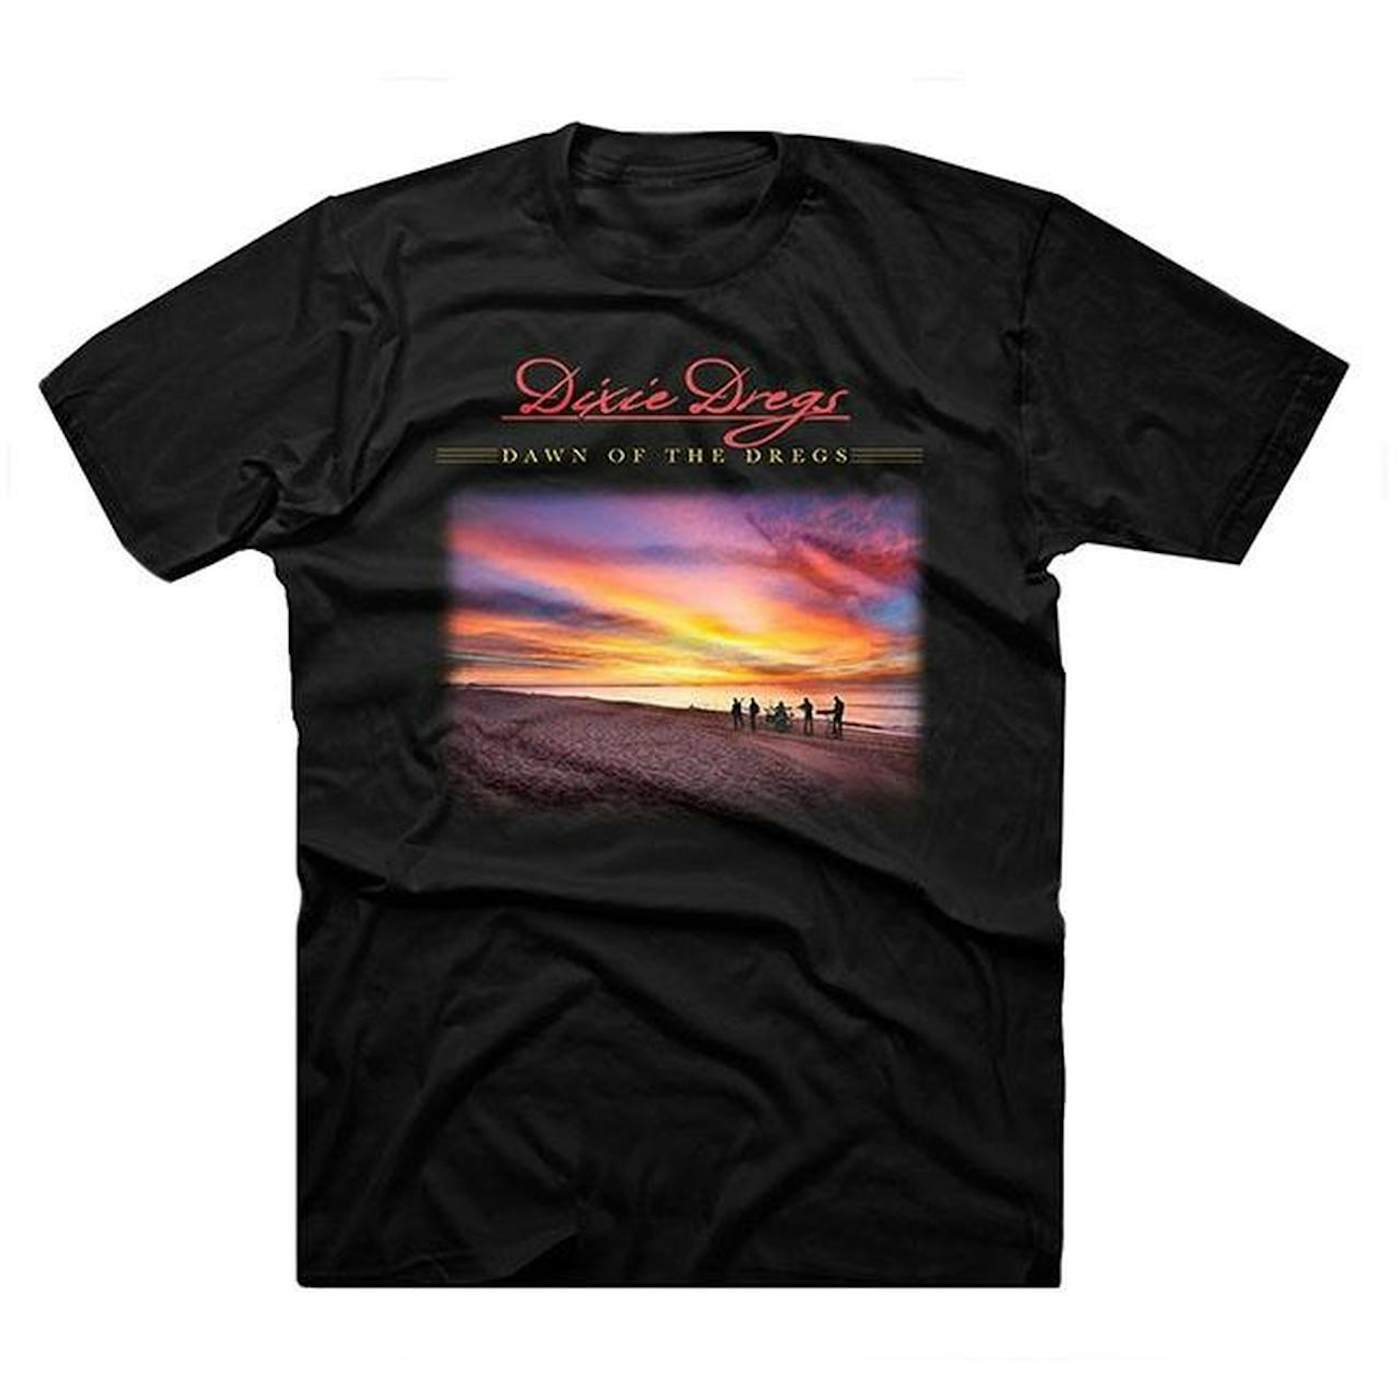 Dixie Dregs Dawn of the Dregs Tour Tee